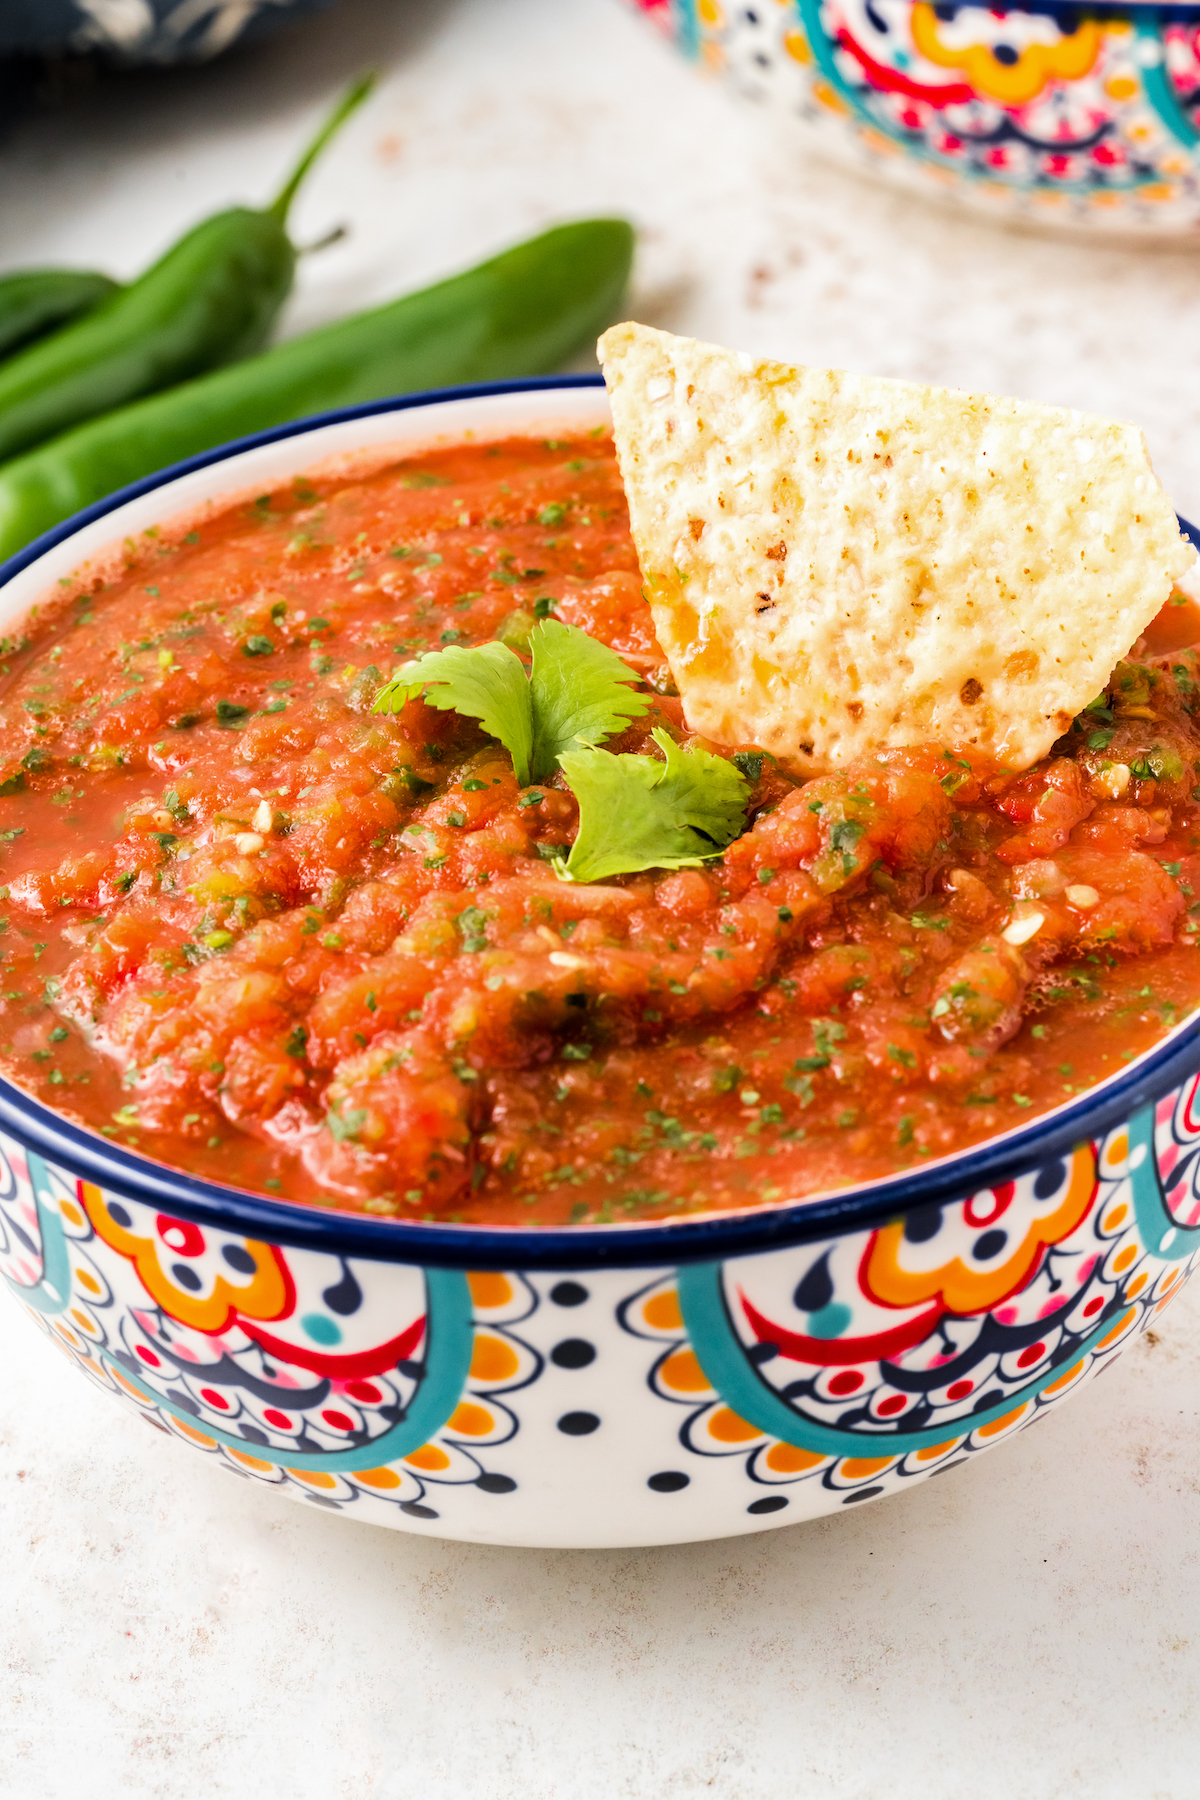 Dipping a corn chip into restaurant-style salsa. 